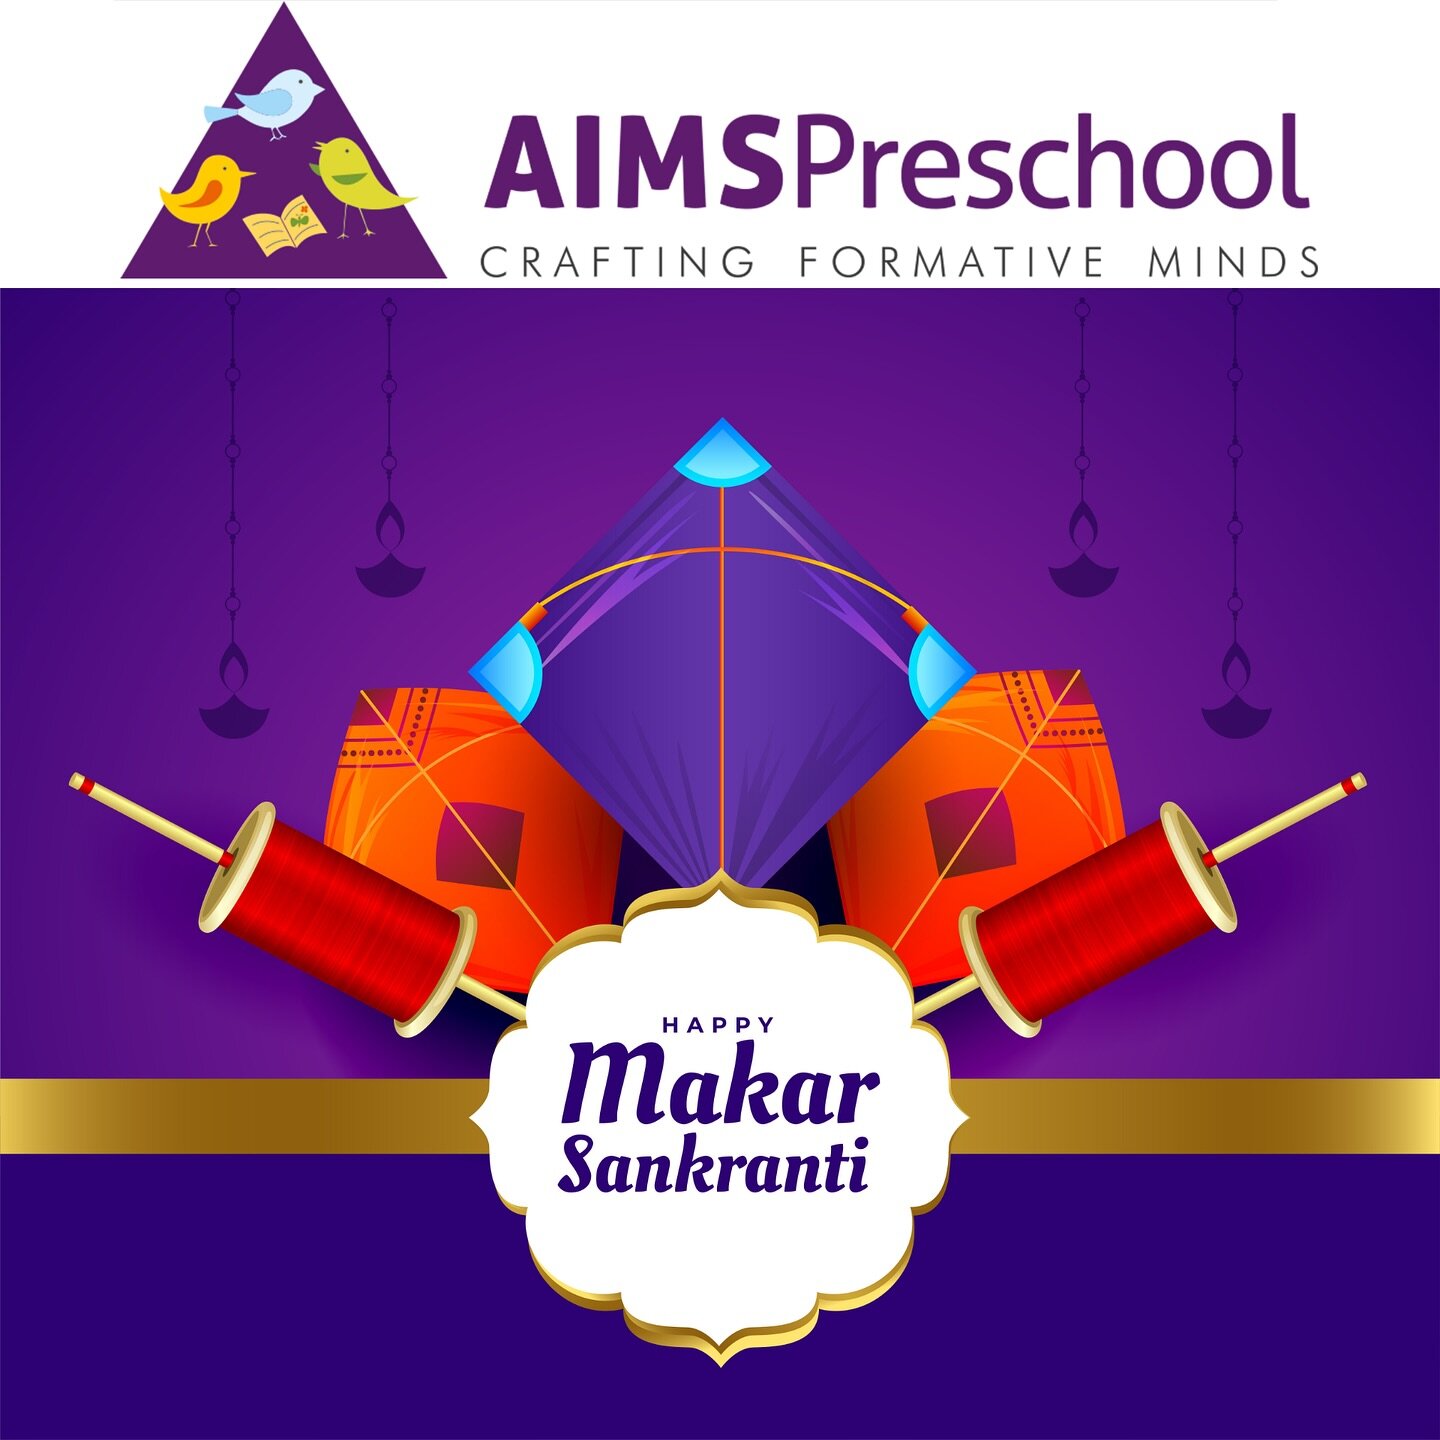 Wishing you and your family a delightful Makar Sankranti. May the kites of your dreams soar high!

AIMS Preschool